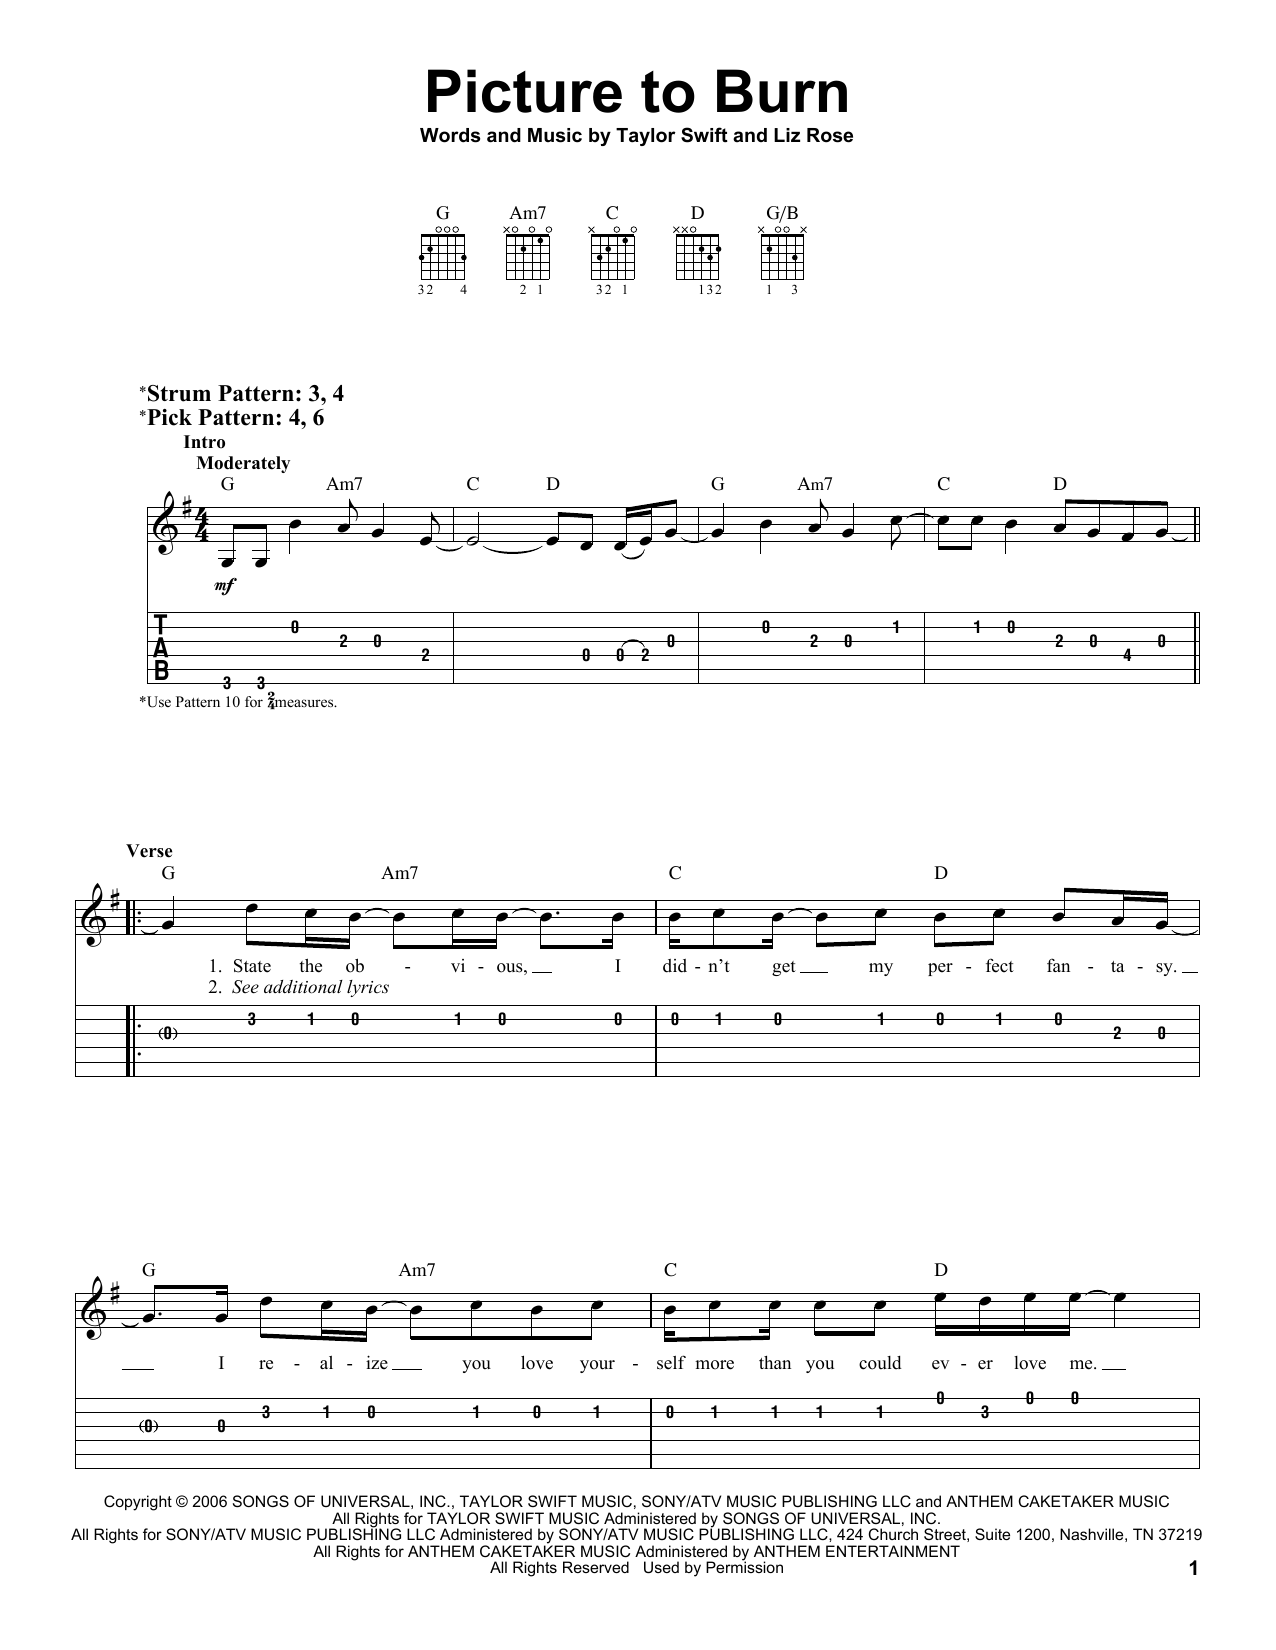 Download Taylor Swift Picture To Burn Sheet Music